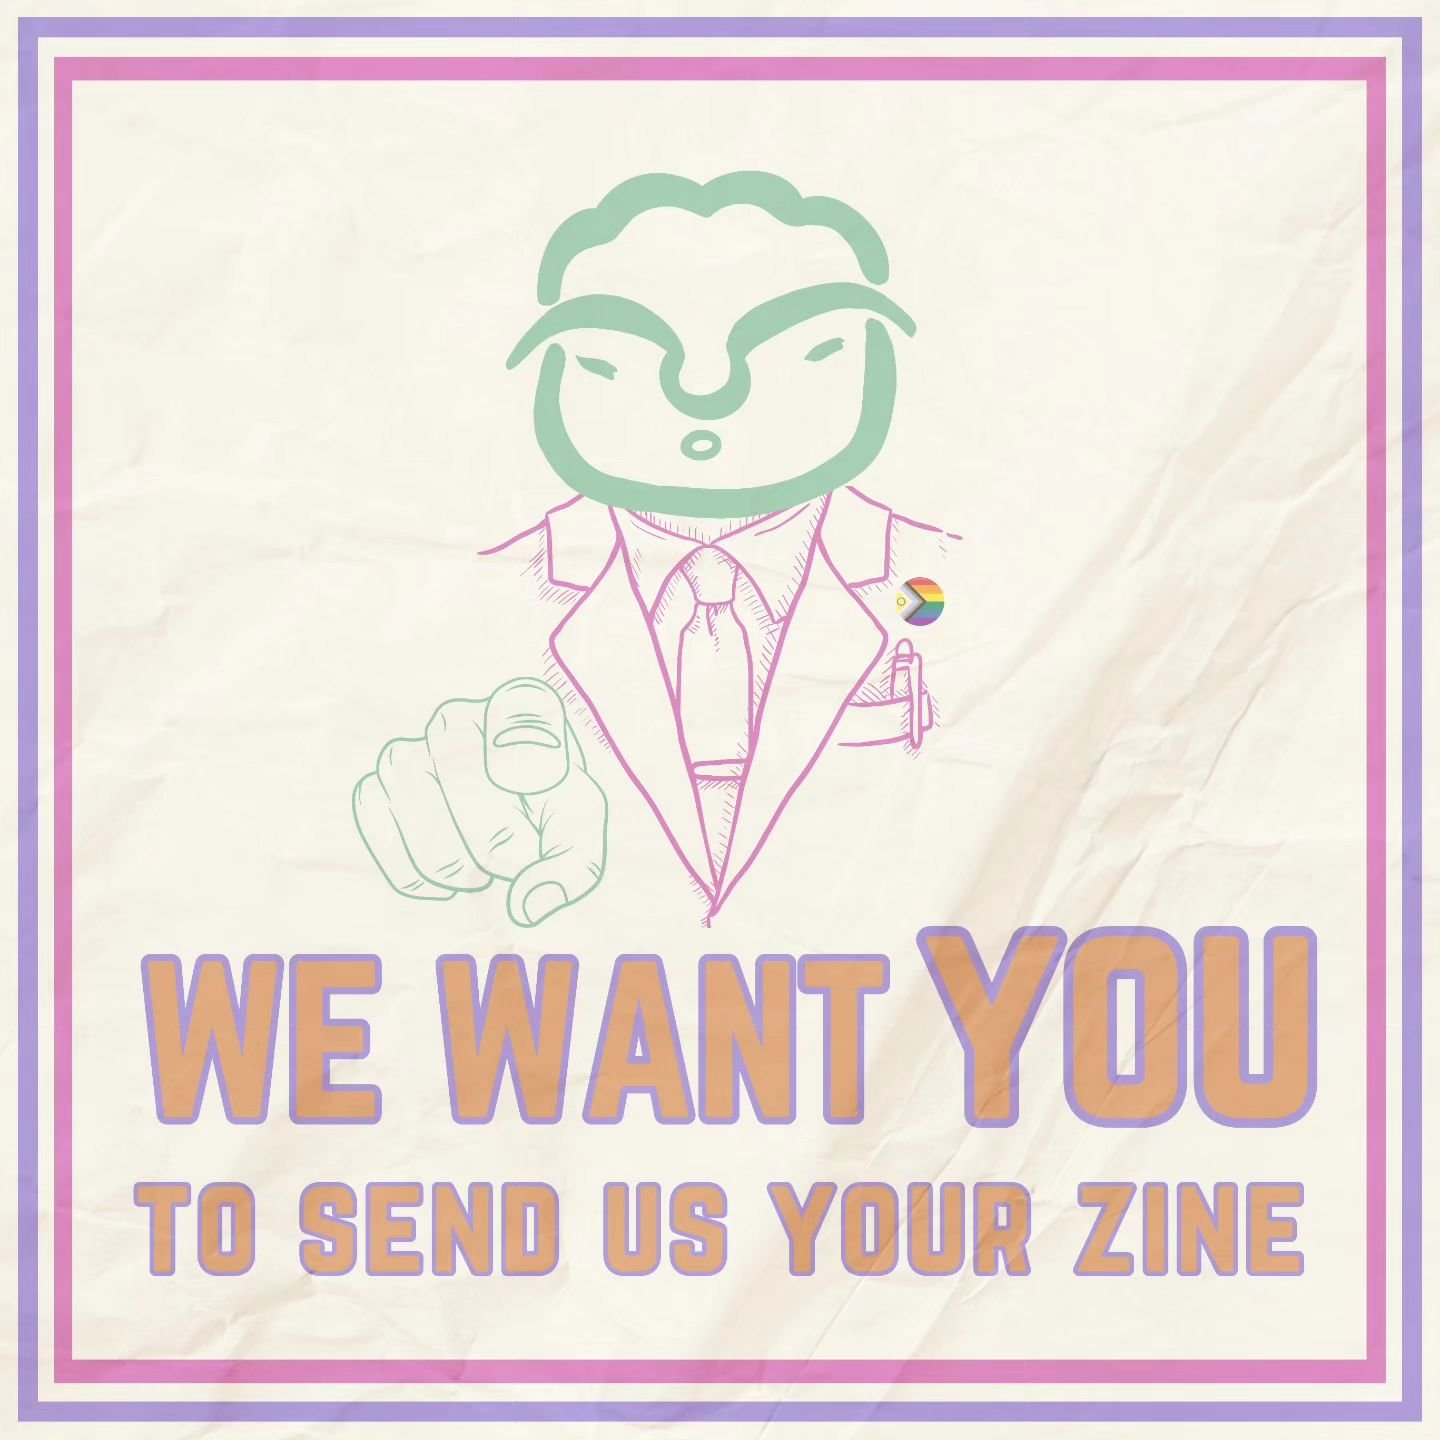 ATTENTION ZINE GAYS,

We want to carry your zine!

We&rsquo;re now accepting submissions for consideration as we bring more zines into the bookstore

Please reach out to us via our website FAQ page &gt; &ldquo;I&rsquo;m an author, will you carry my w